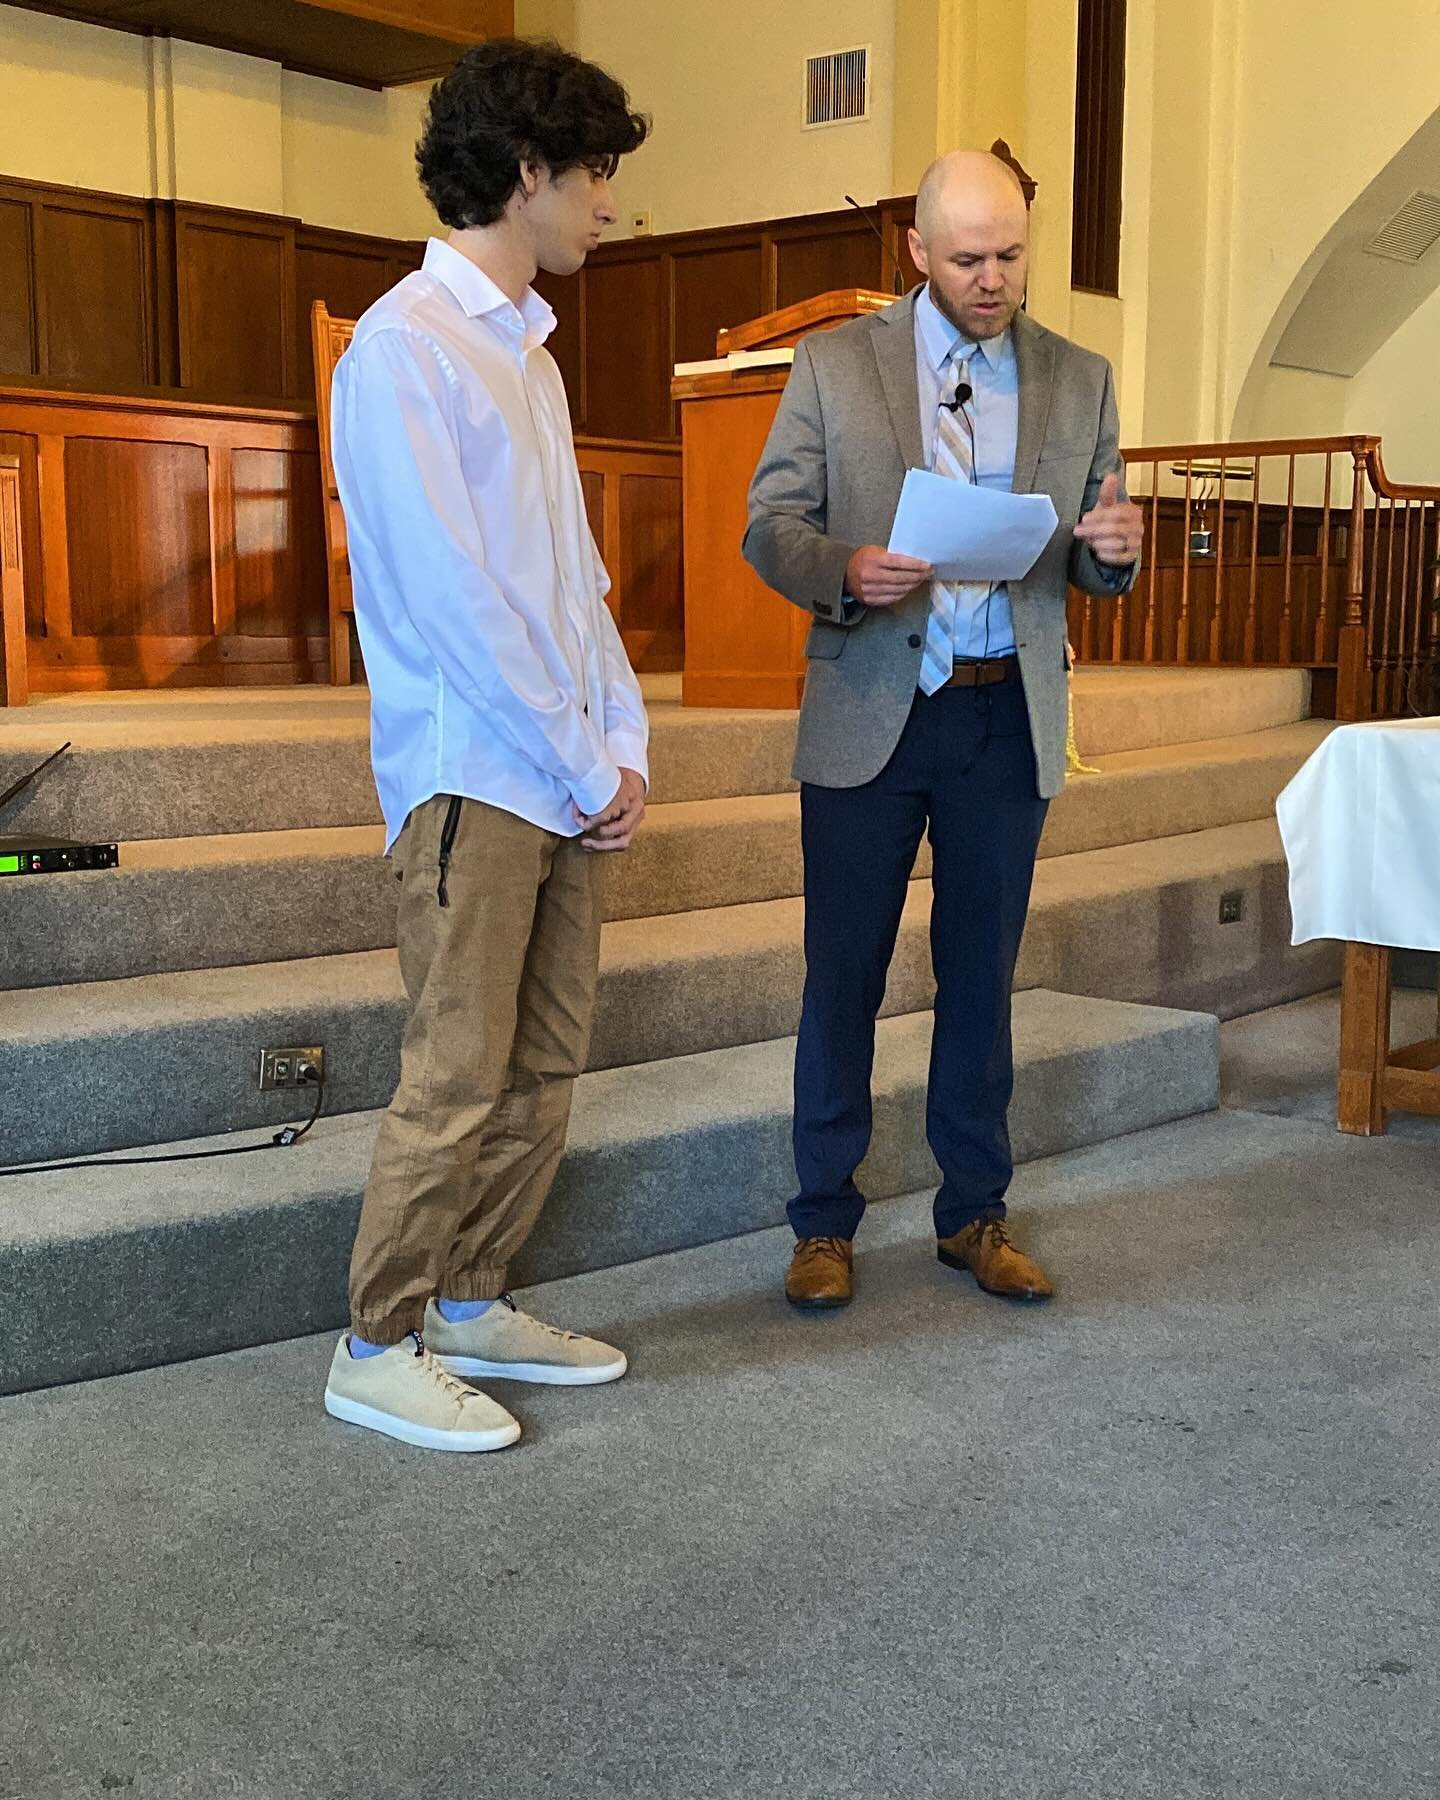 &iexcl;Bienvenido a nuestro hermano Marco Cruz a la familia de la fe!  It&rsquo;s always a great joy to see the profession of faith of our baptized sons and daughters, and we pray that the Lord continues to work mightily in the heart of our beloved b